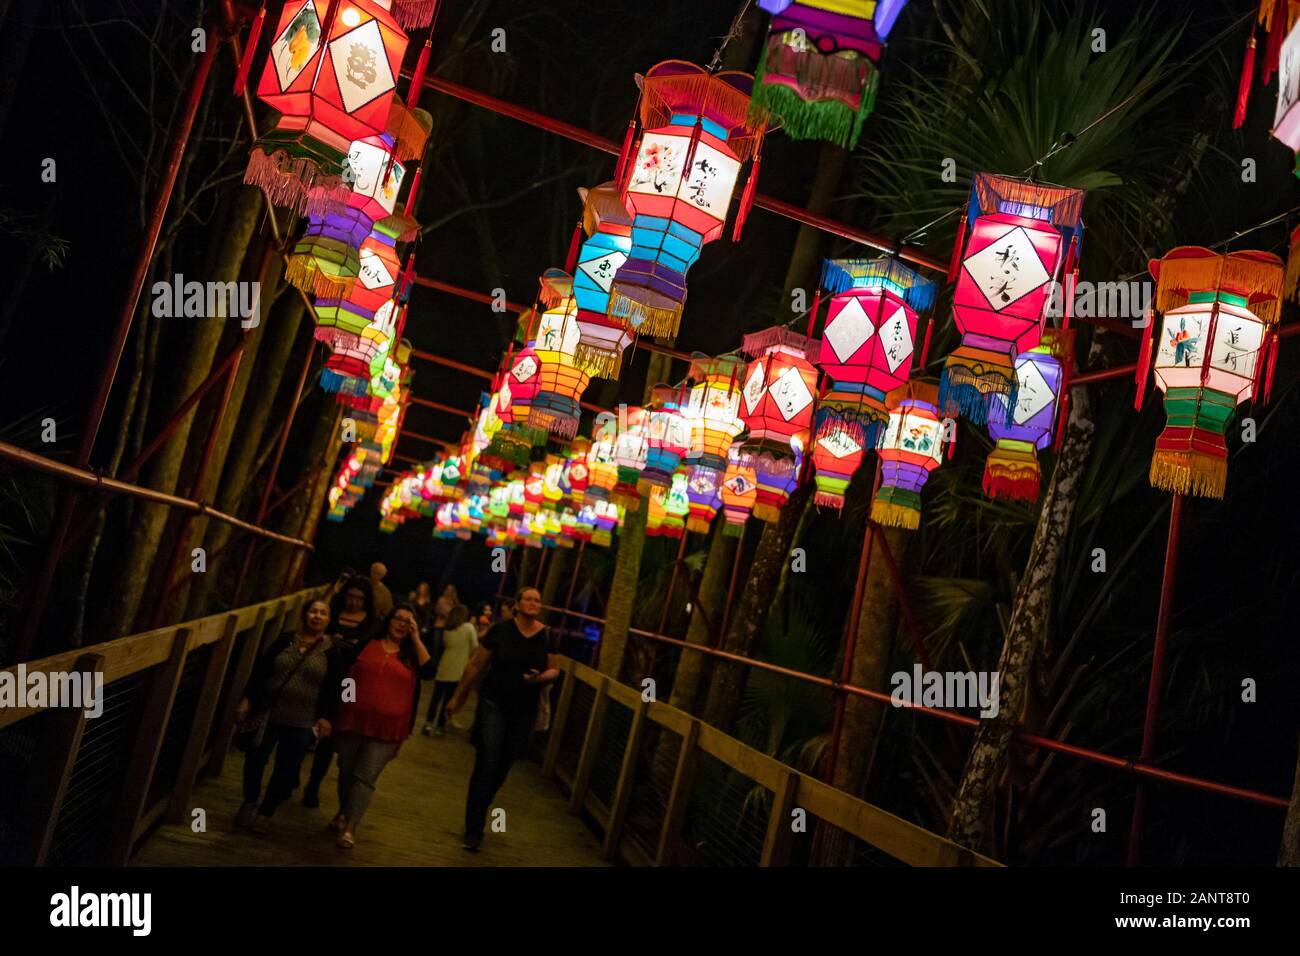 Sanford, Fla/USA - Dec 29, 2019: The Asian Lantern Festival, Into the Wild,  at the Central Florida Zoo & Botanical Gardens featured over 30 LED lanter  Stock Photo - Alamy